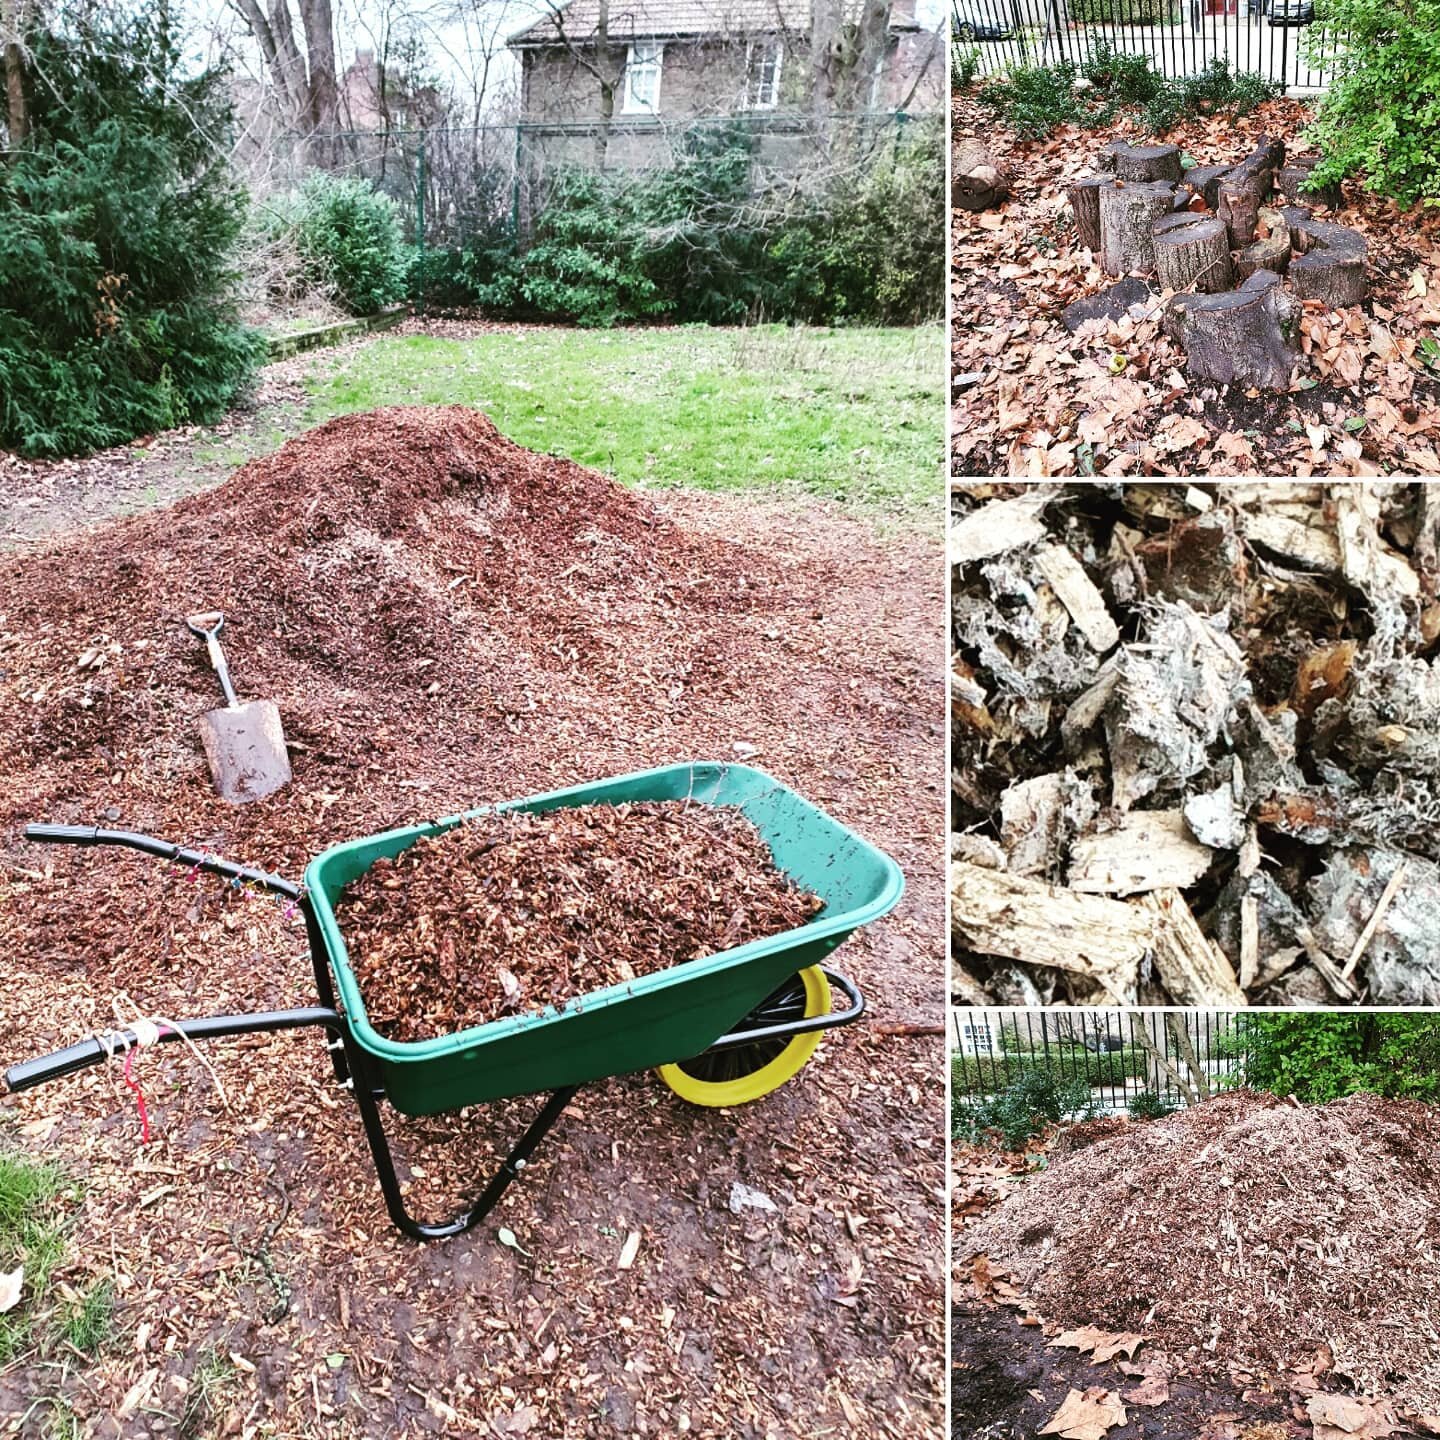 I (Vanessa, Chair of the Friends of #wormholtpark ) christened my wheelbarrow Xmas present by borrowing woodchip onto the loggeries by the SW Sawley Rd entrance. 💚
The woodchip &amp; logs make a terrific habitat for invertebrates, including the rare